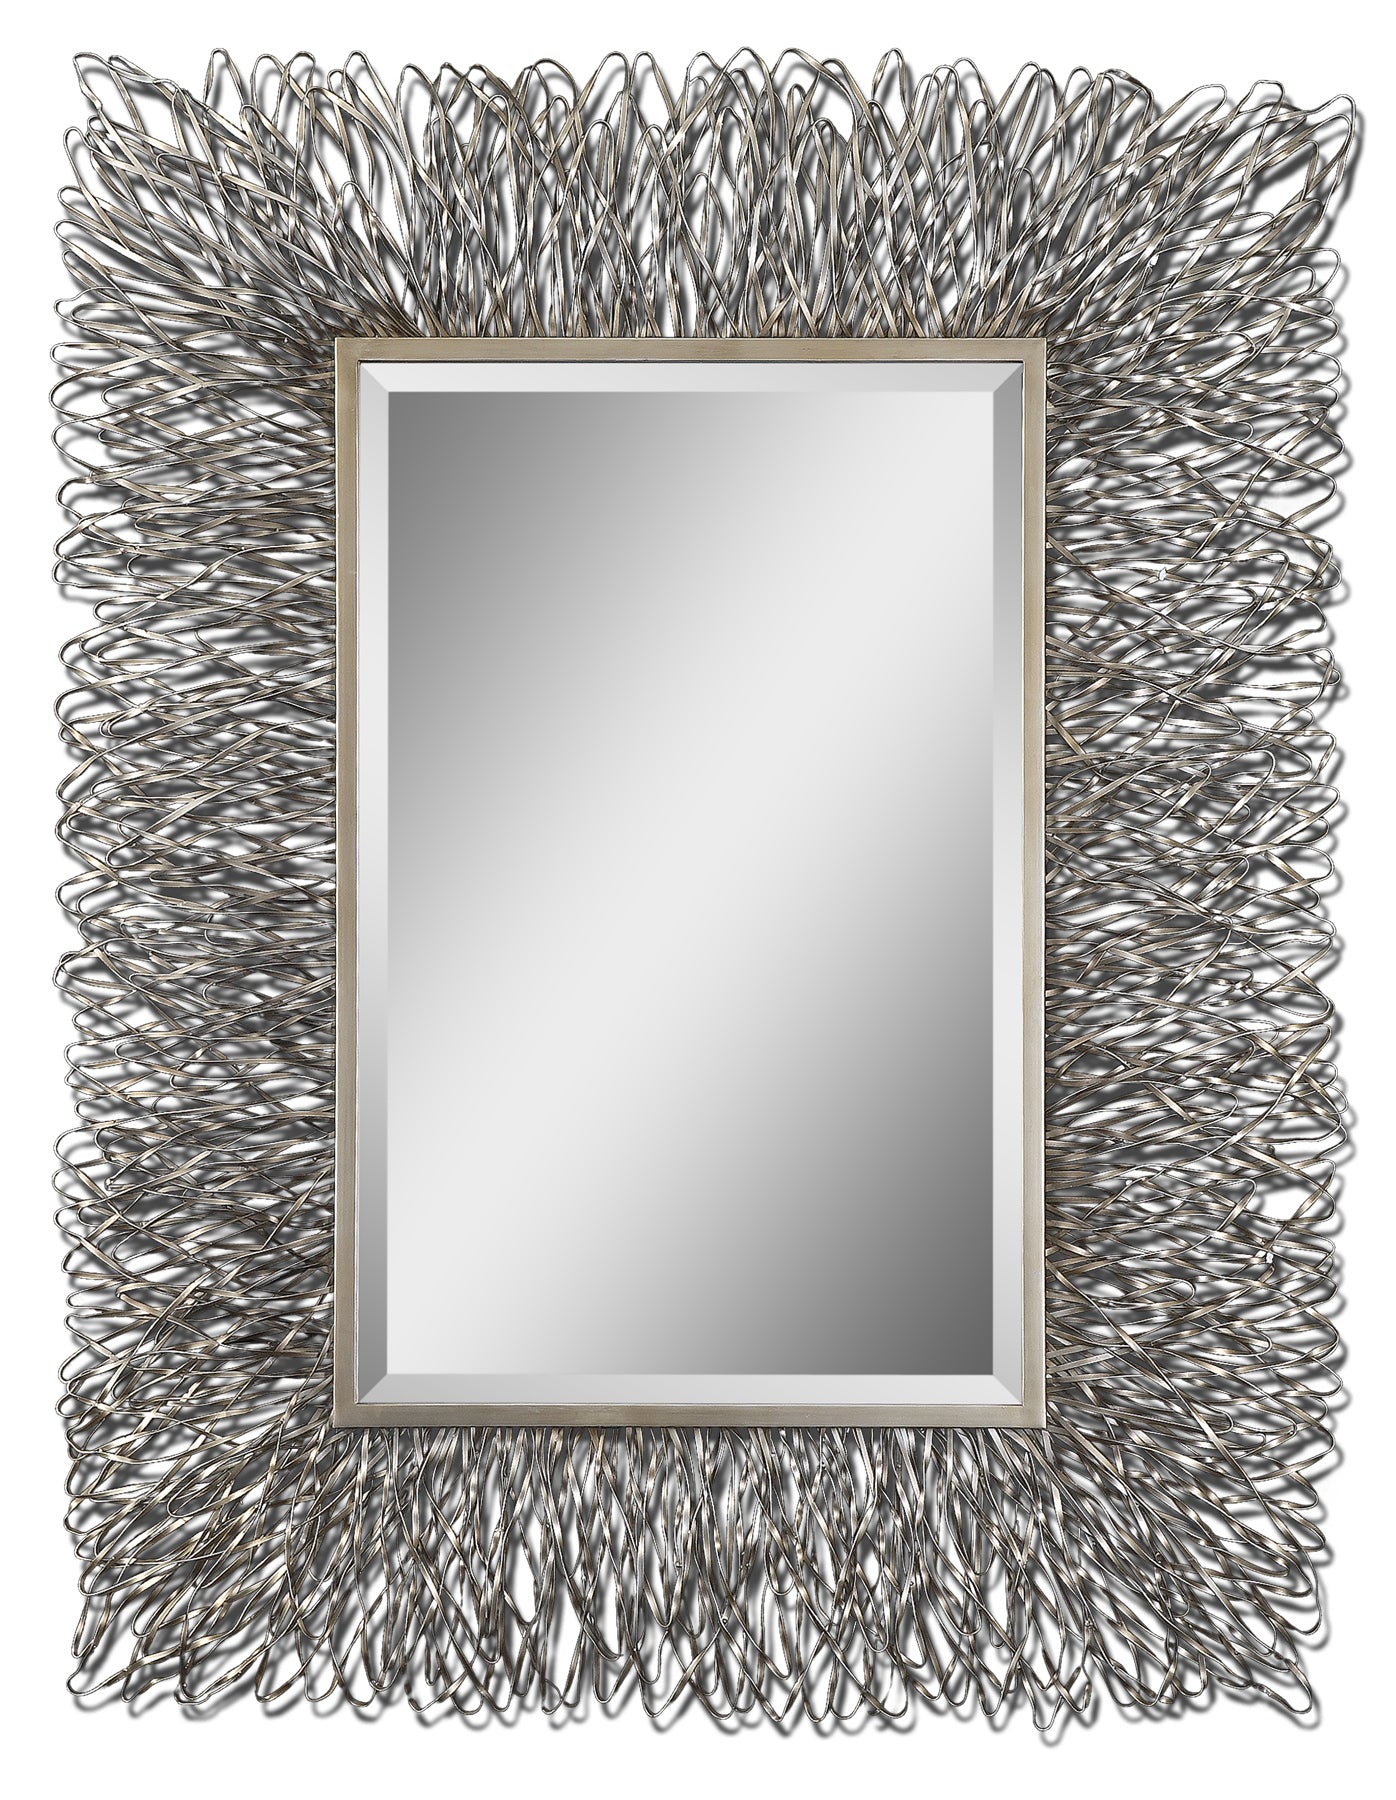 This Decorative Mirror Features A Hand Forged Metal Frame With A Silver Finish And Light Champagne Highlights. Mirror Has ...